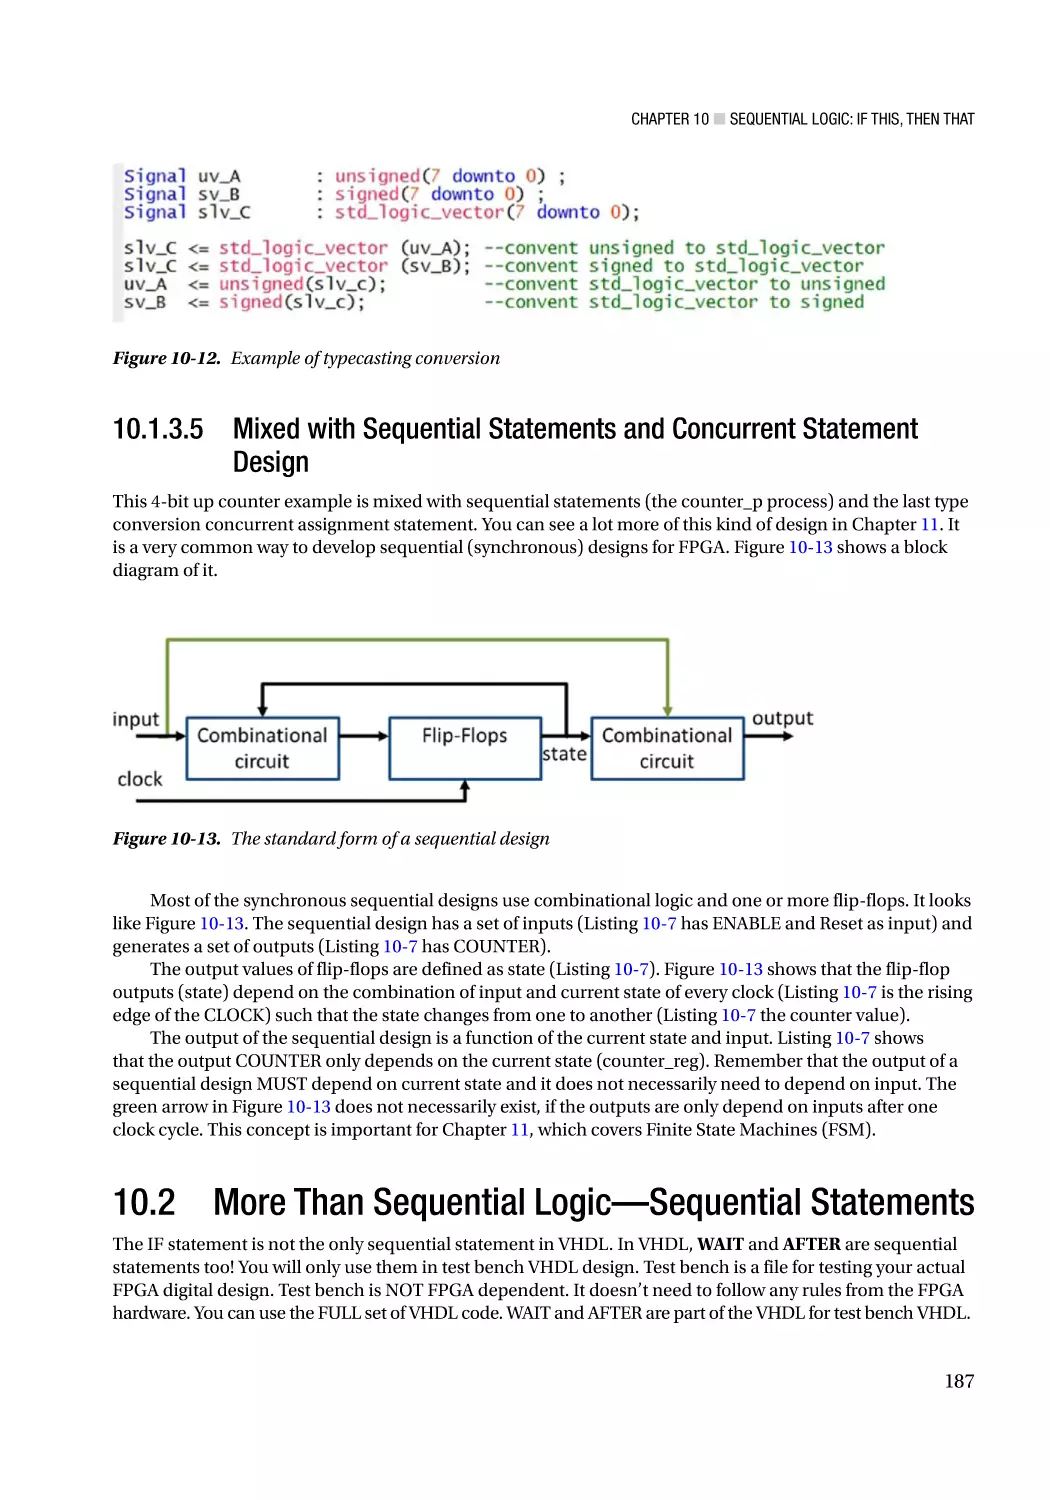 10.1.3.5 Mixed with Sequential Statements and Concurrent Statement Design
10.2 More Than Sequential Logic—Sequential Statements